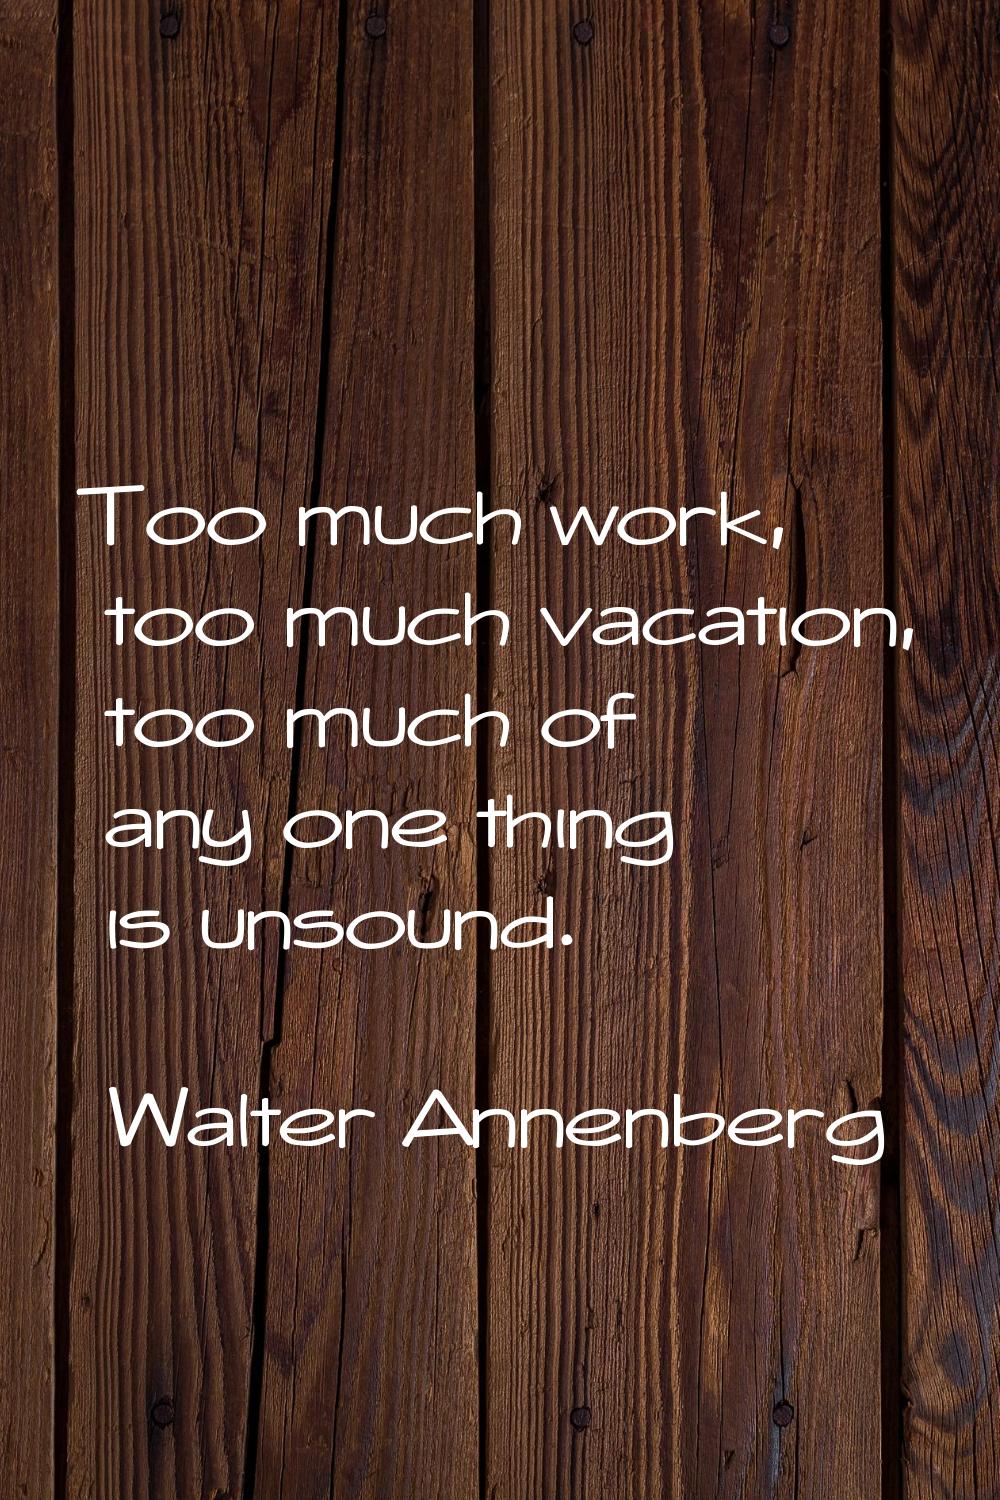 Too much work, too much vacation, too much of any one thing is unsound.